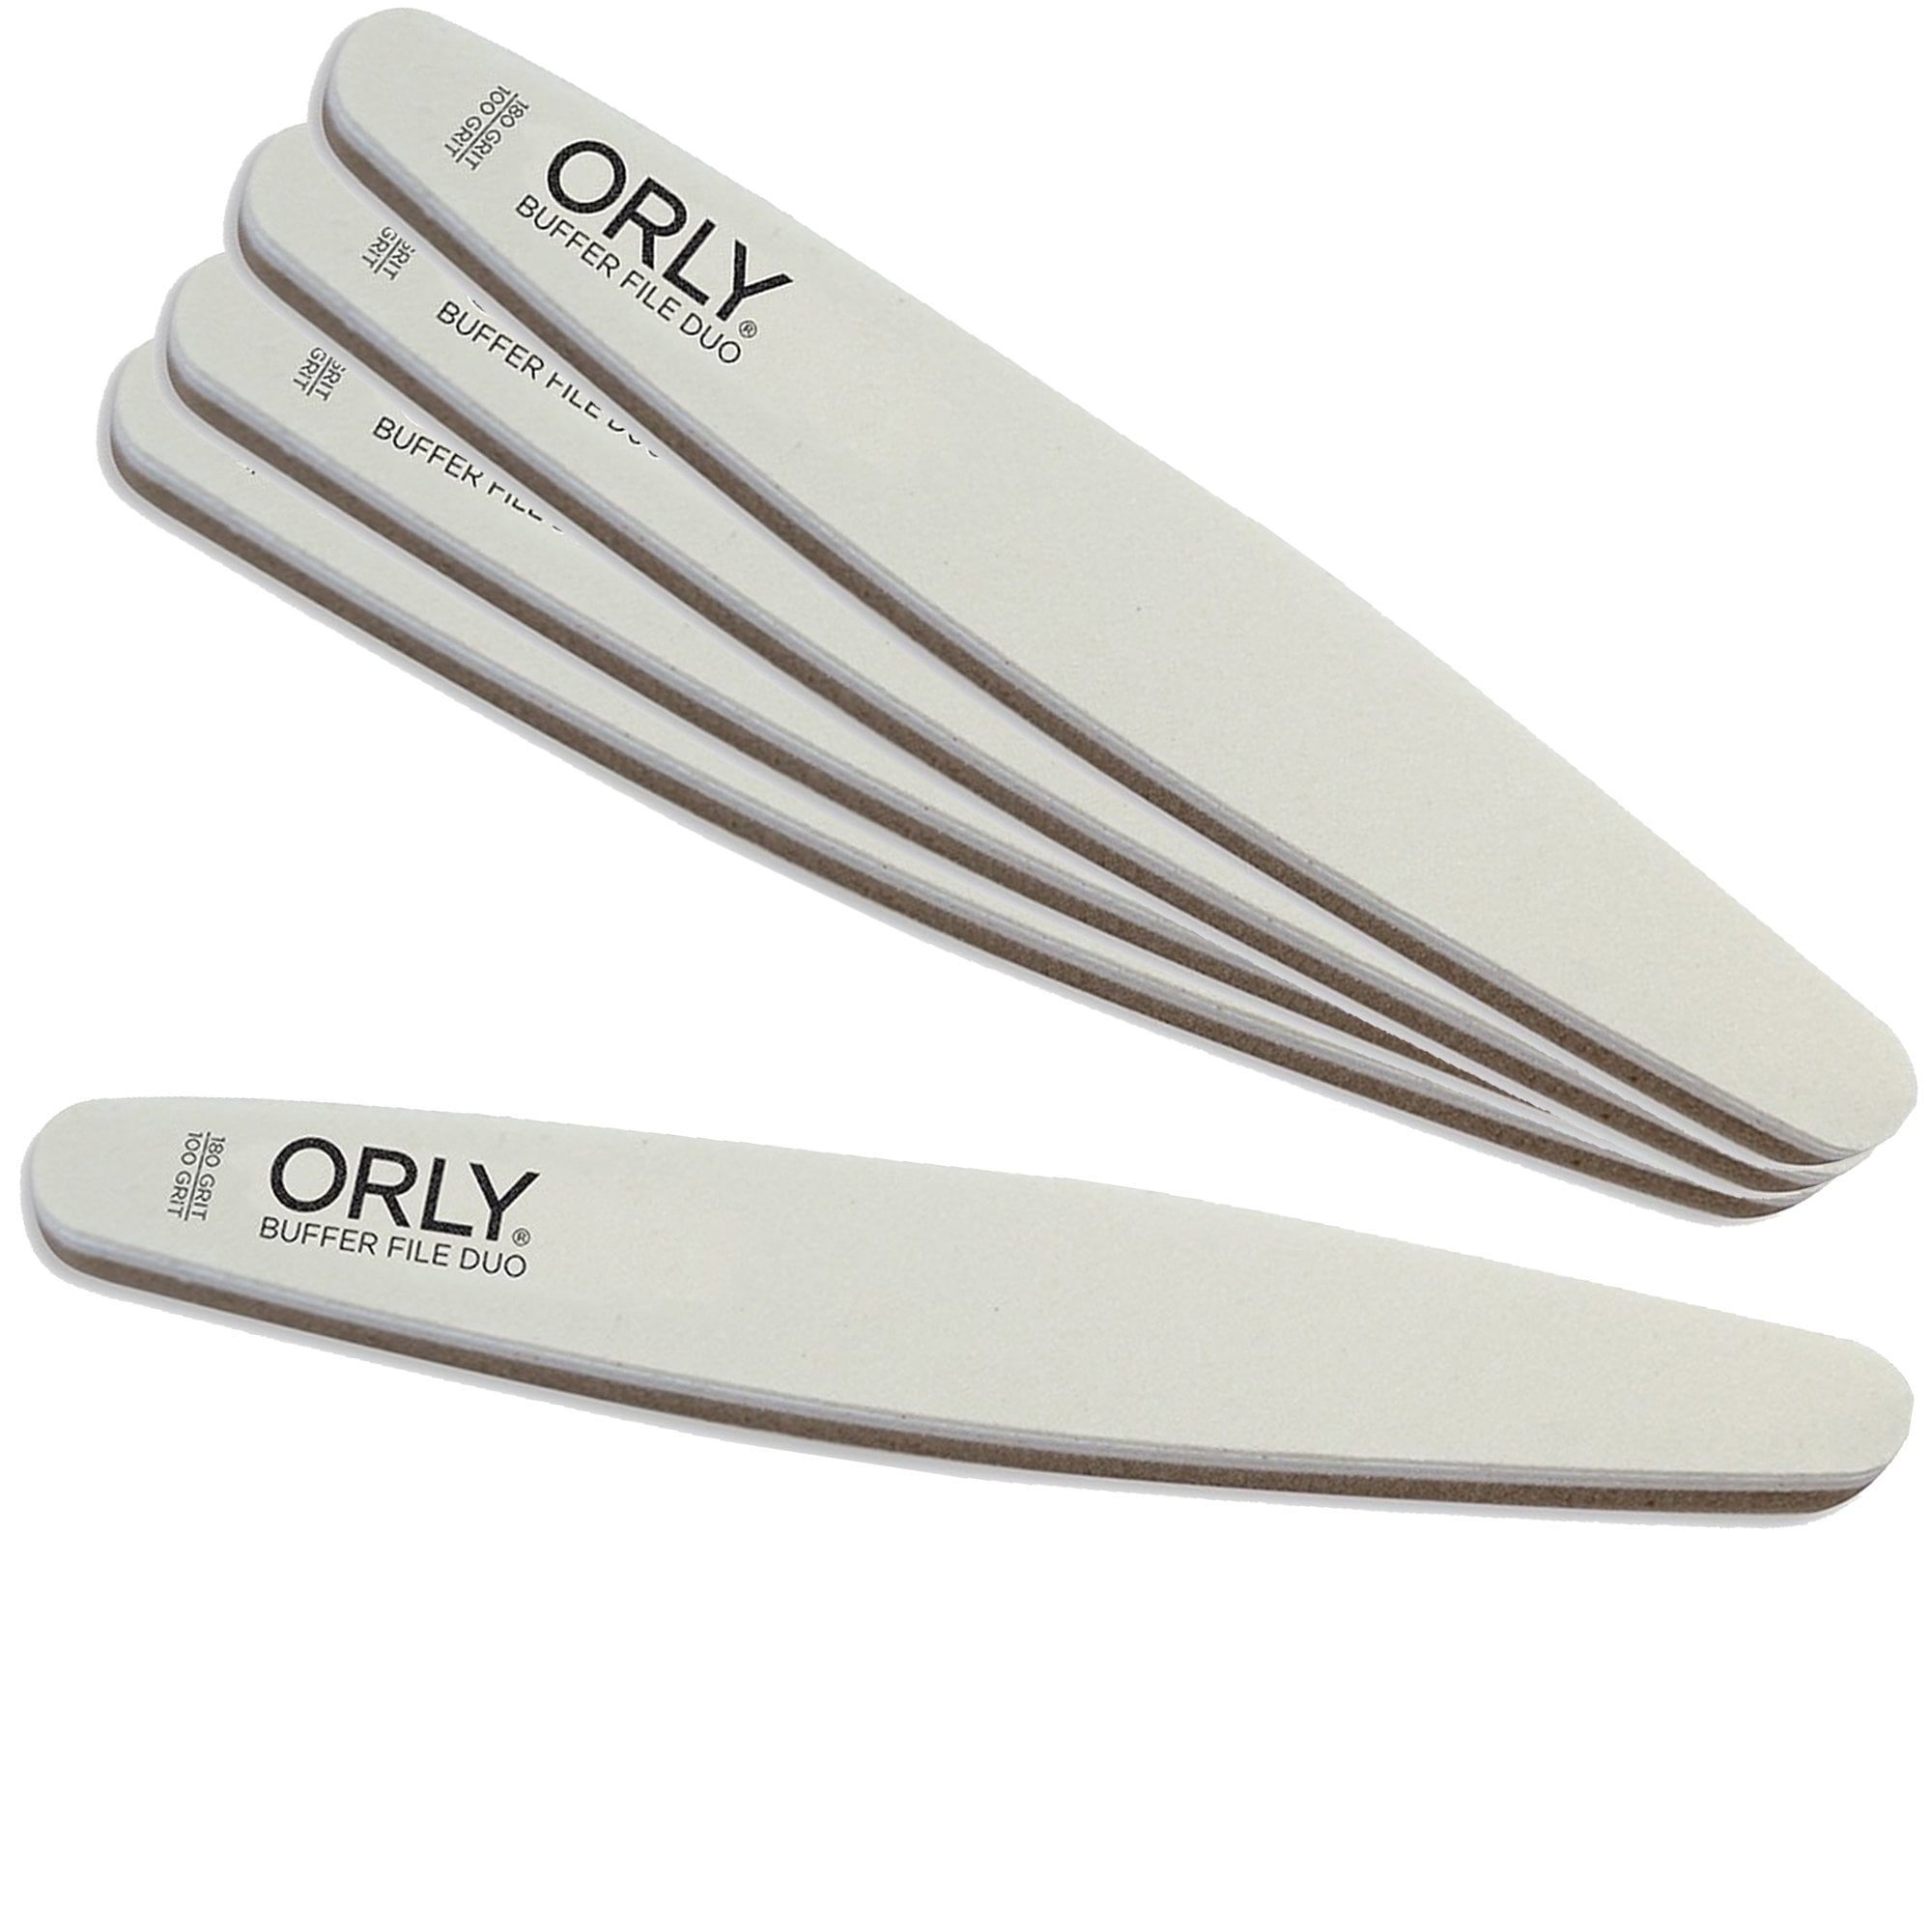 Orly Buffer File Duo | 5pc Pack